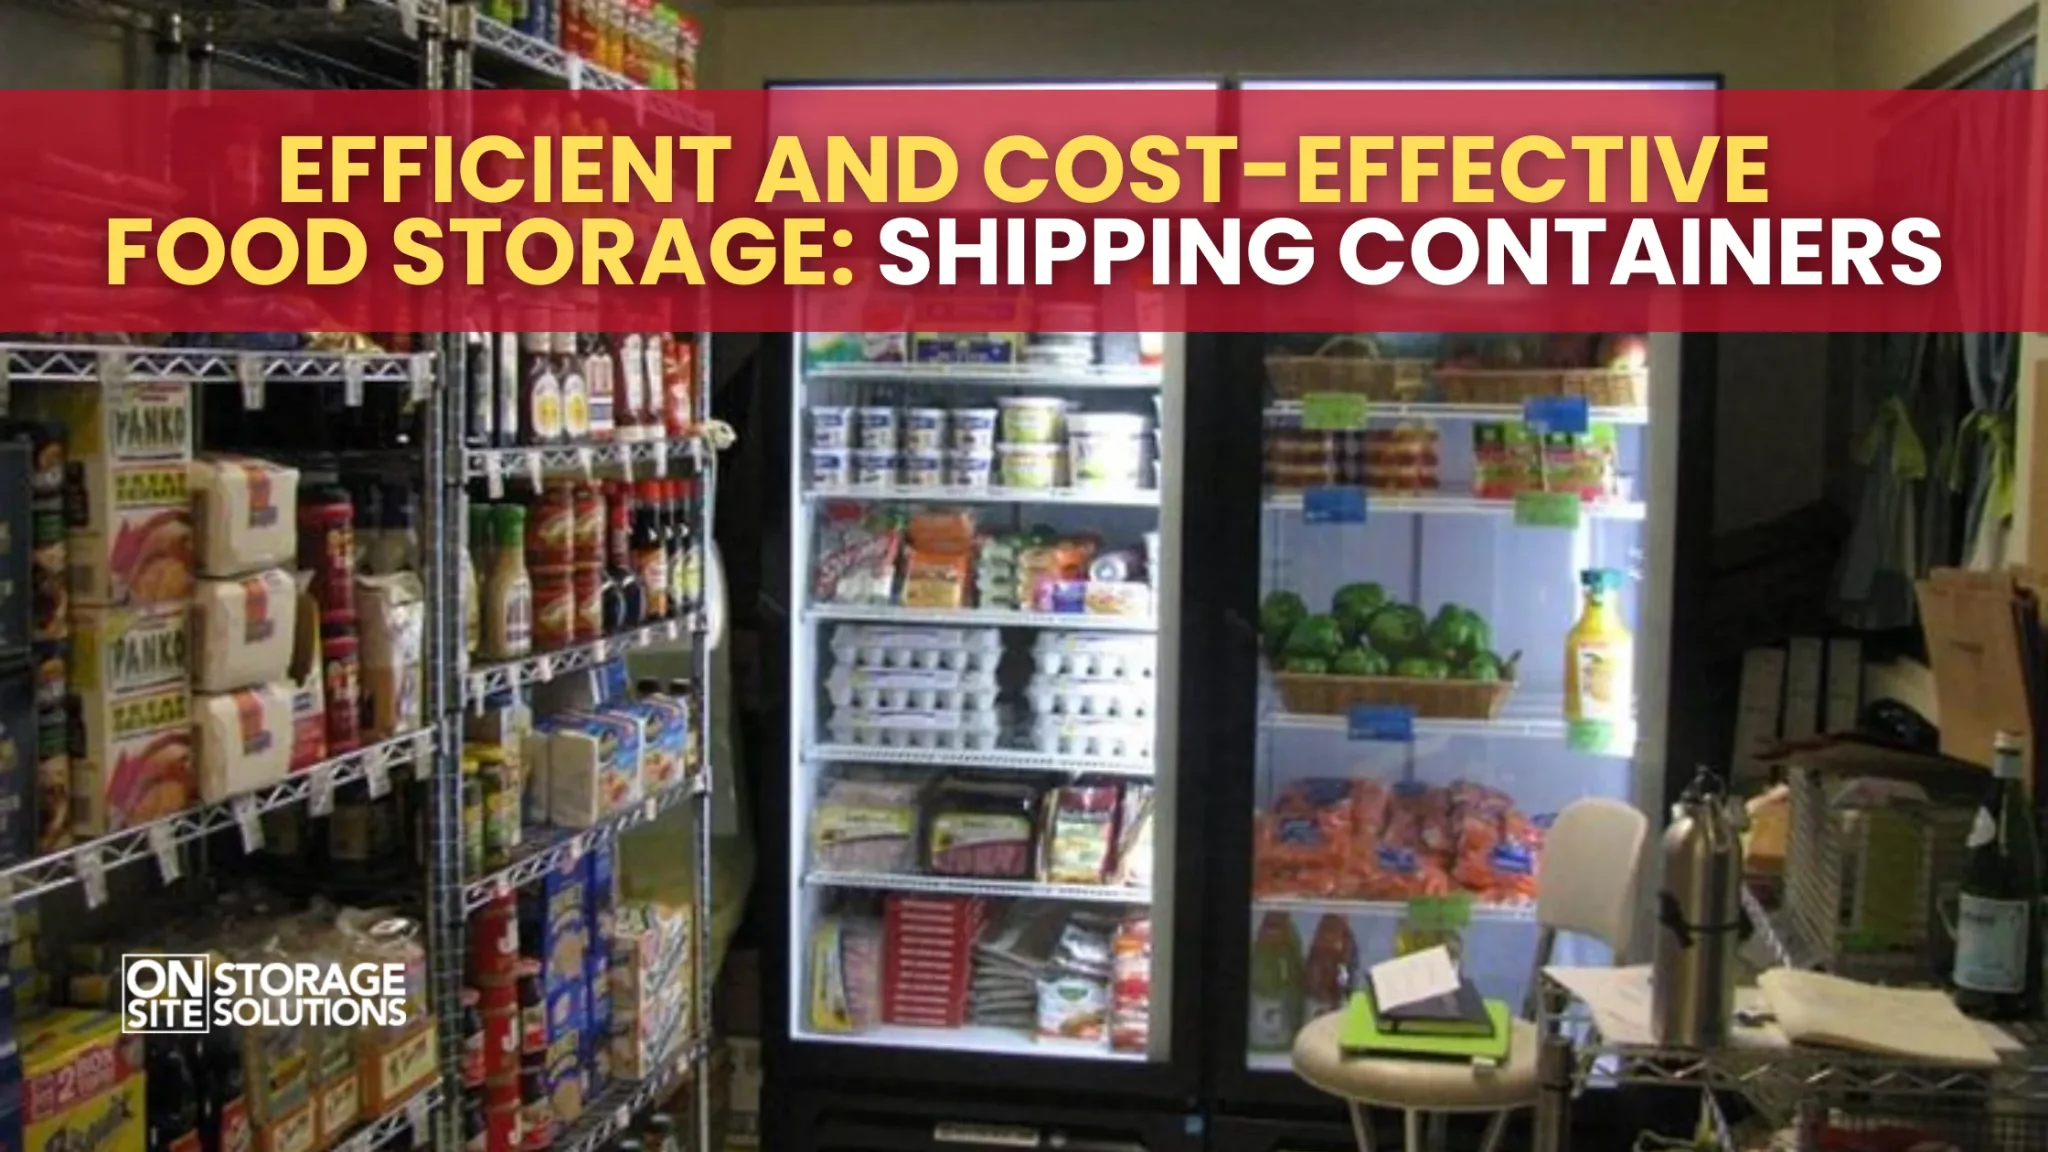 Efficient and Cost-Effective Food Storage: Shipping Containers